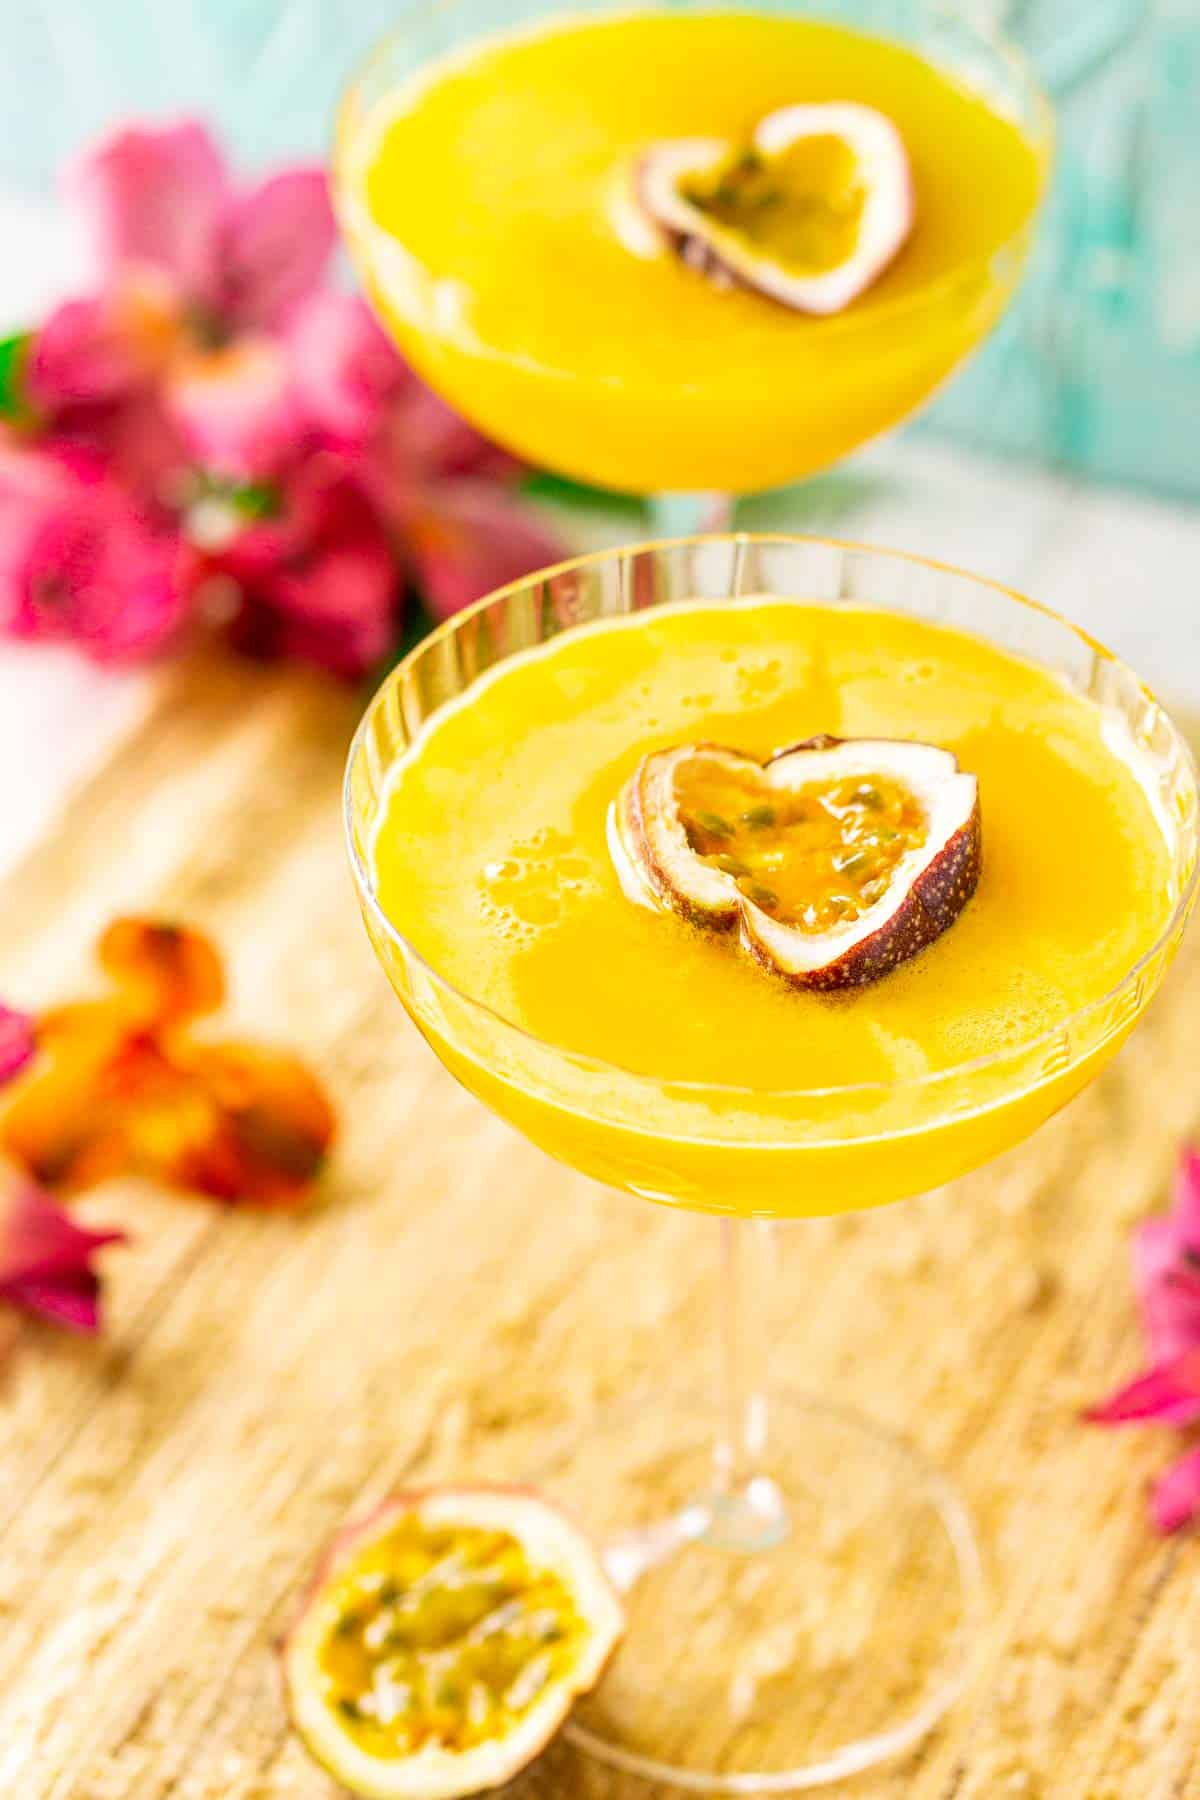 A close-up view of the passion fruit martini on a straw placemat with half of a fresh passion fruit to the side of the glass.